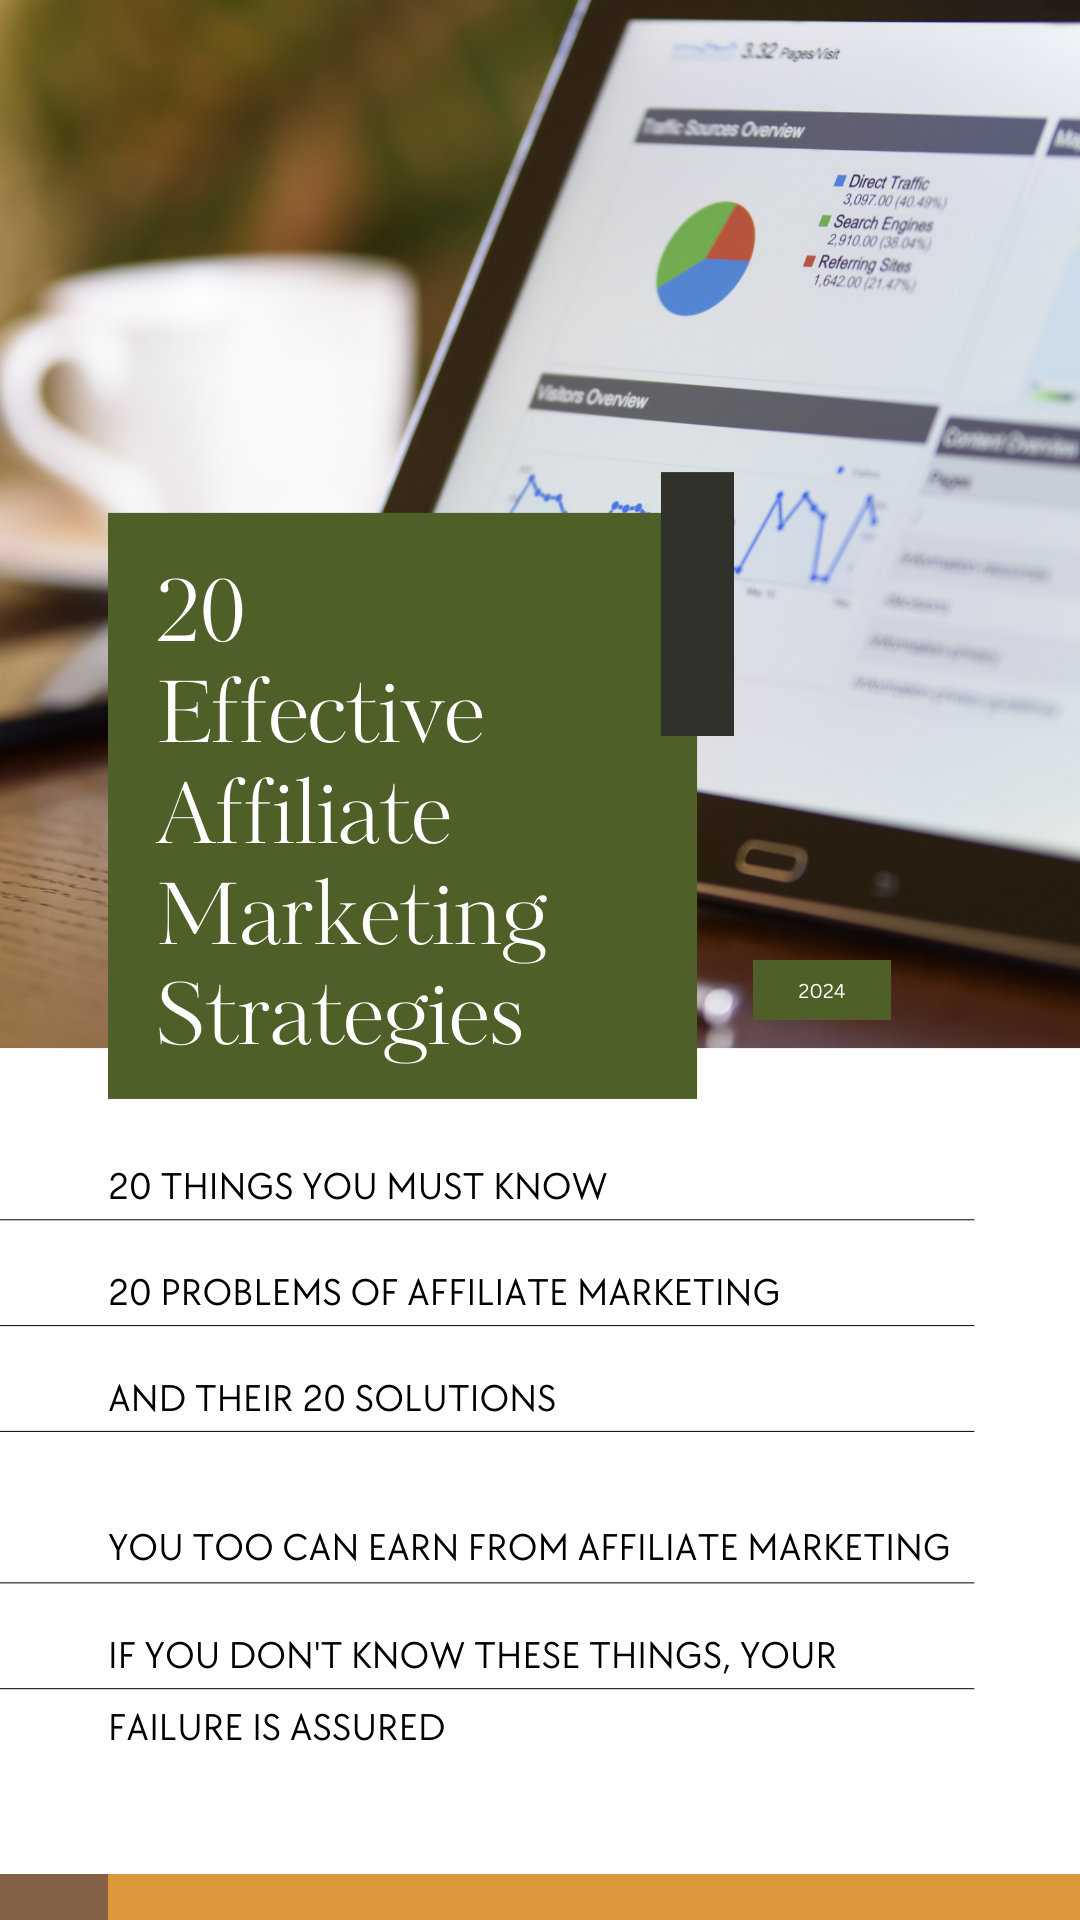 Top 20 ways to become a millionaire as an affiliate marketer 